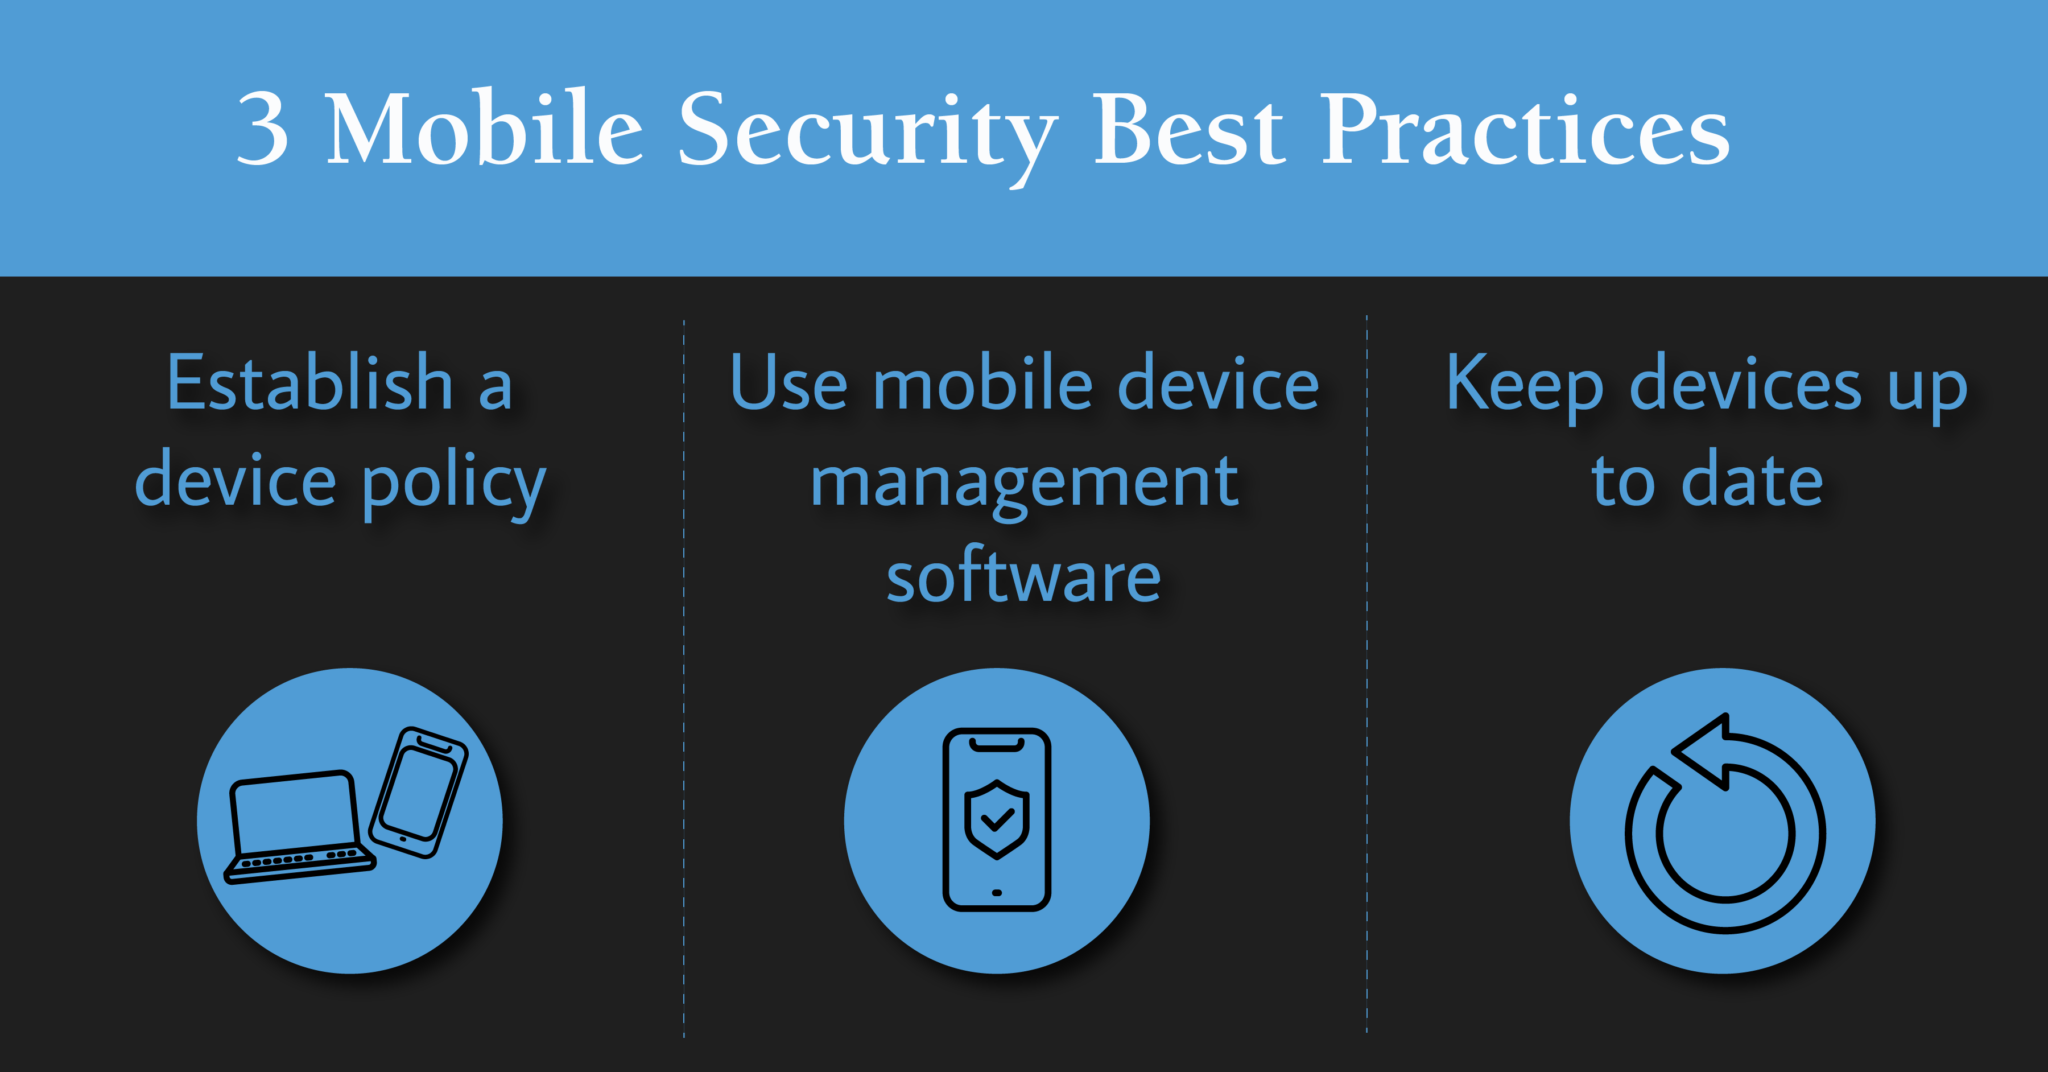 mobile device security research paper